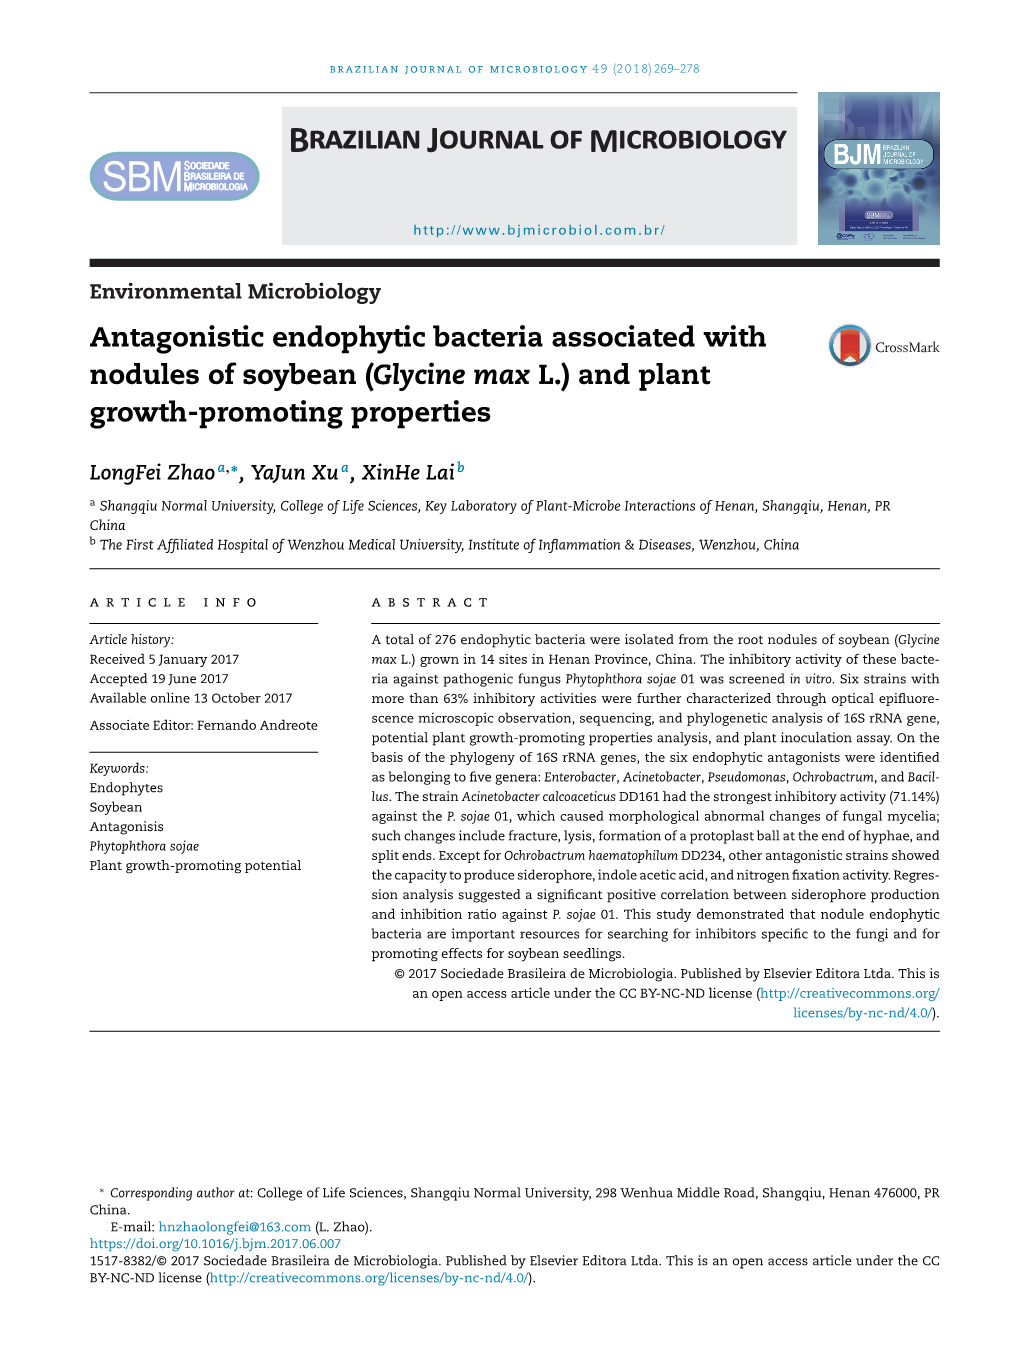 Antagonistic Endophytic Bacteria Associated with Nodules of Soybean (Glycine Max L.) and Plant Growth-Promoting Properties